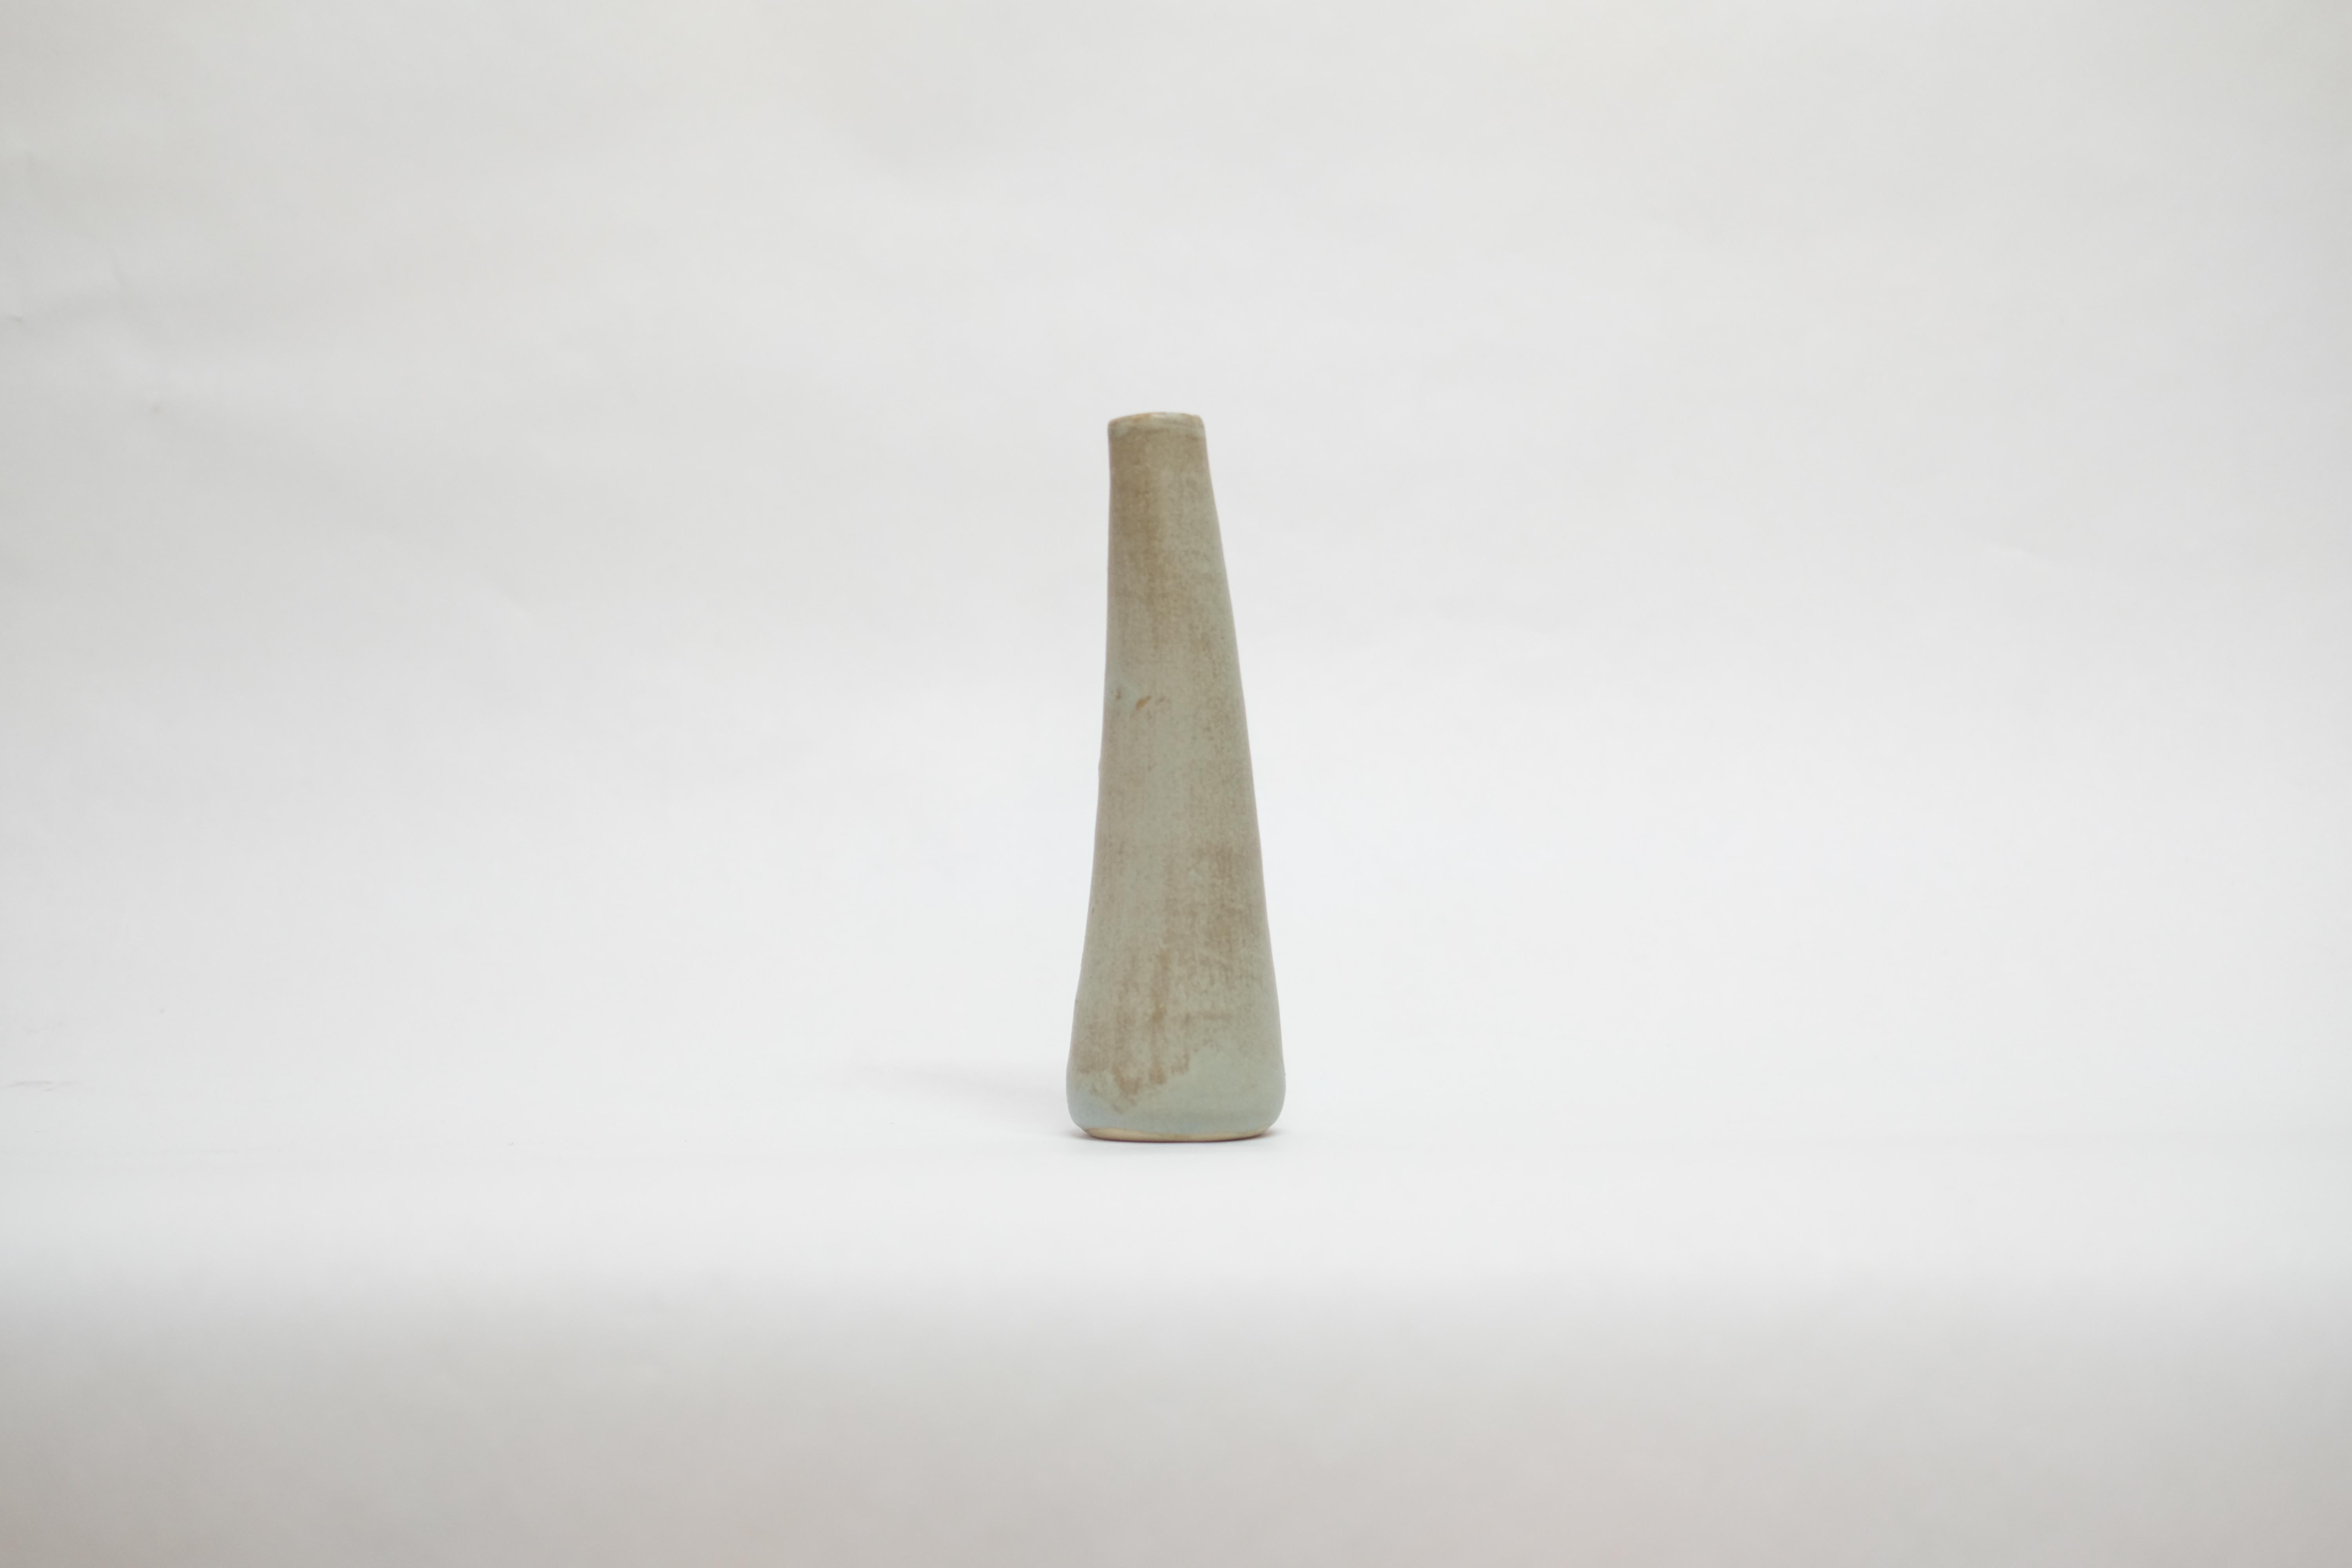 Solitario stoneware vase by Camila Apaez
One of a kind
Materials: Stoneware
Dimensions: 7 x 7 x 19 cm
Options: White bone, stone Sage, Artichoke green (while supplies last), buttermilk

This year has been shaped by the topographies of our